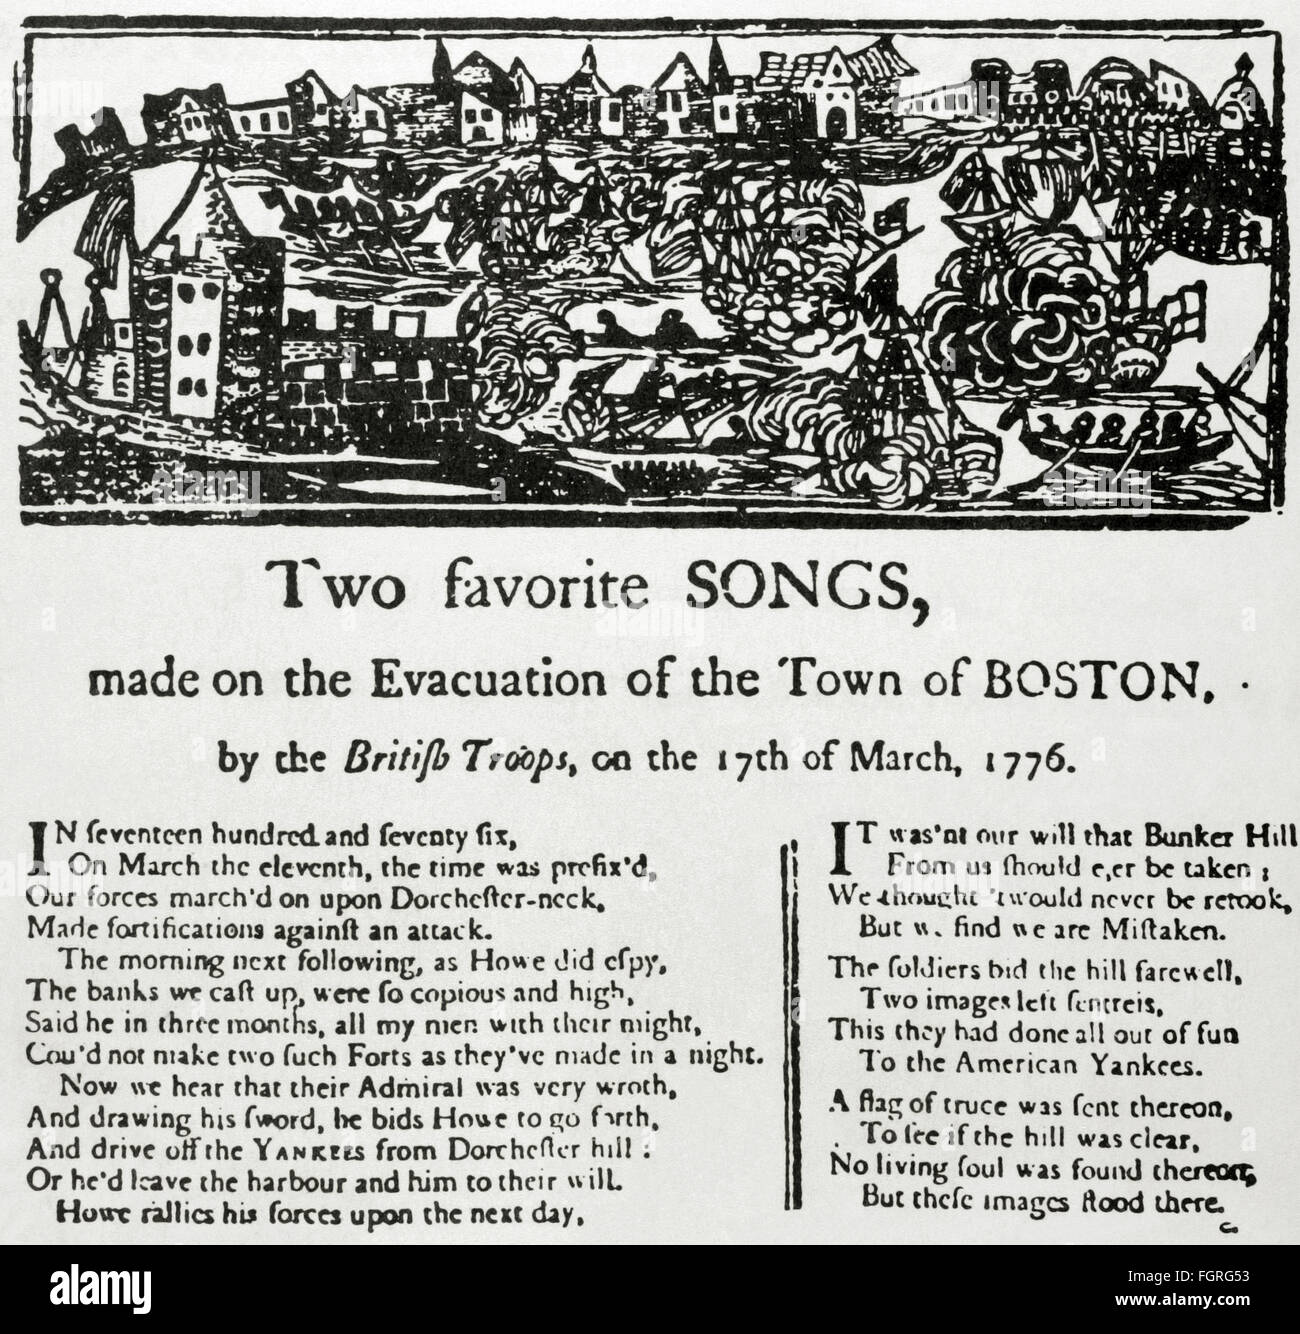 American Revolutionary War (1775-1783). Two favorite songs made on the evacuation of the town of Boston by the British troops on the 17th of March, 1776 after the Siege of Boston Engraving. The American Revolution, 19th century. Stock Photo